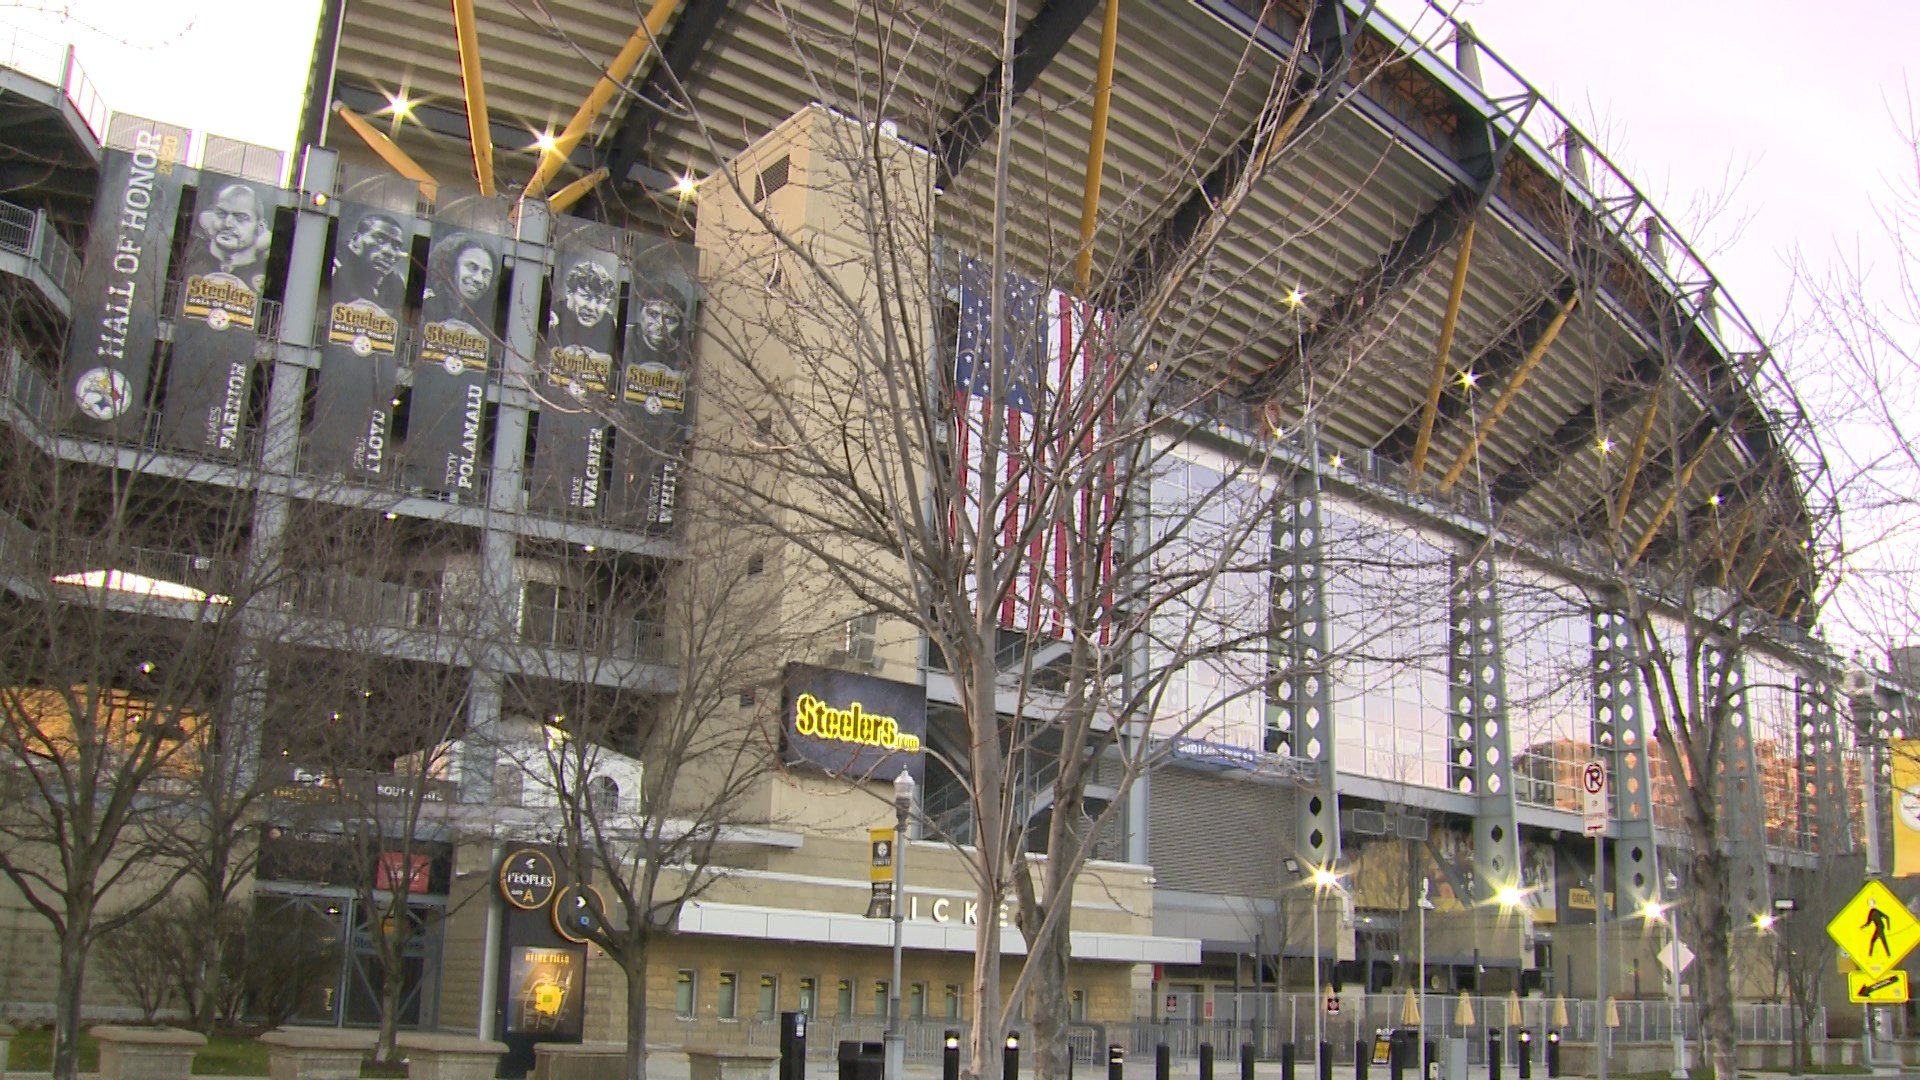 Steelers, Authorities Investigating Spreading of Ashes at Heinz Field Sunday